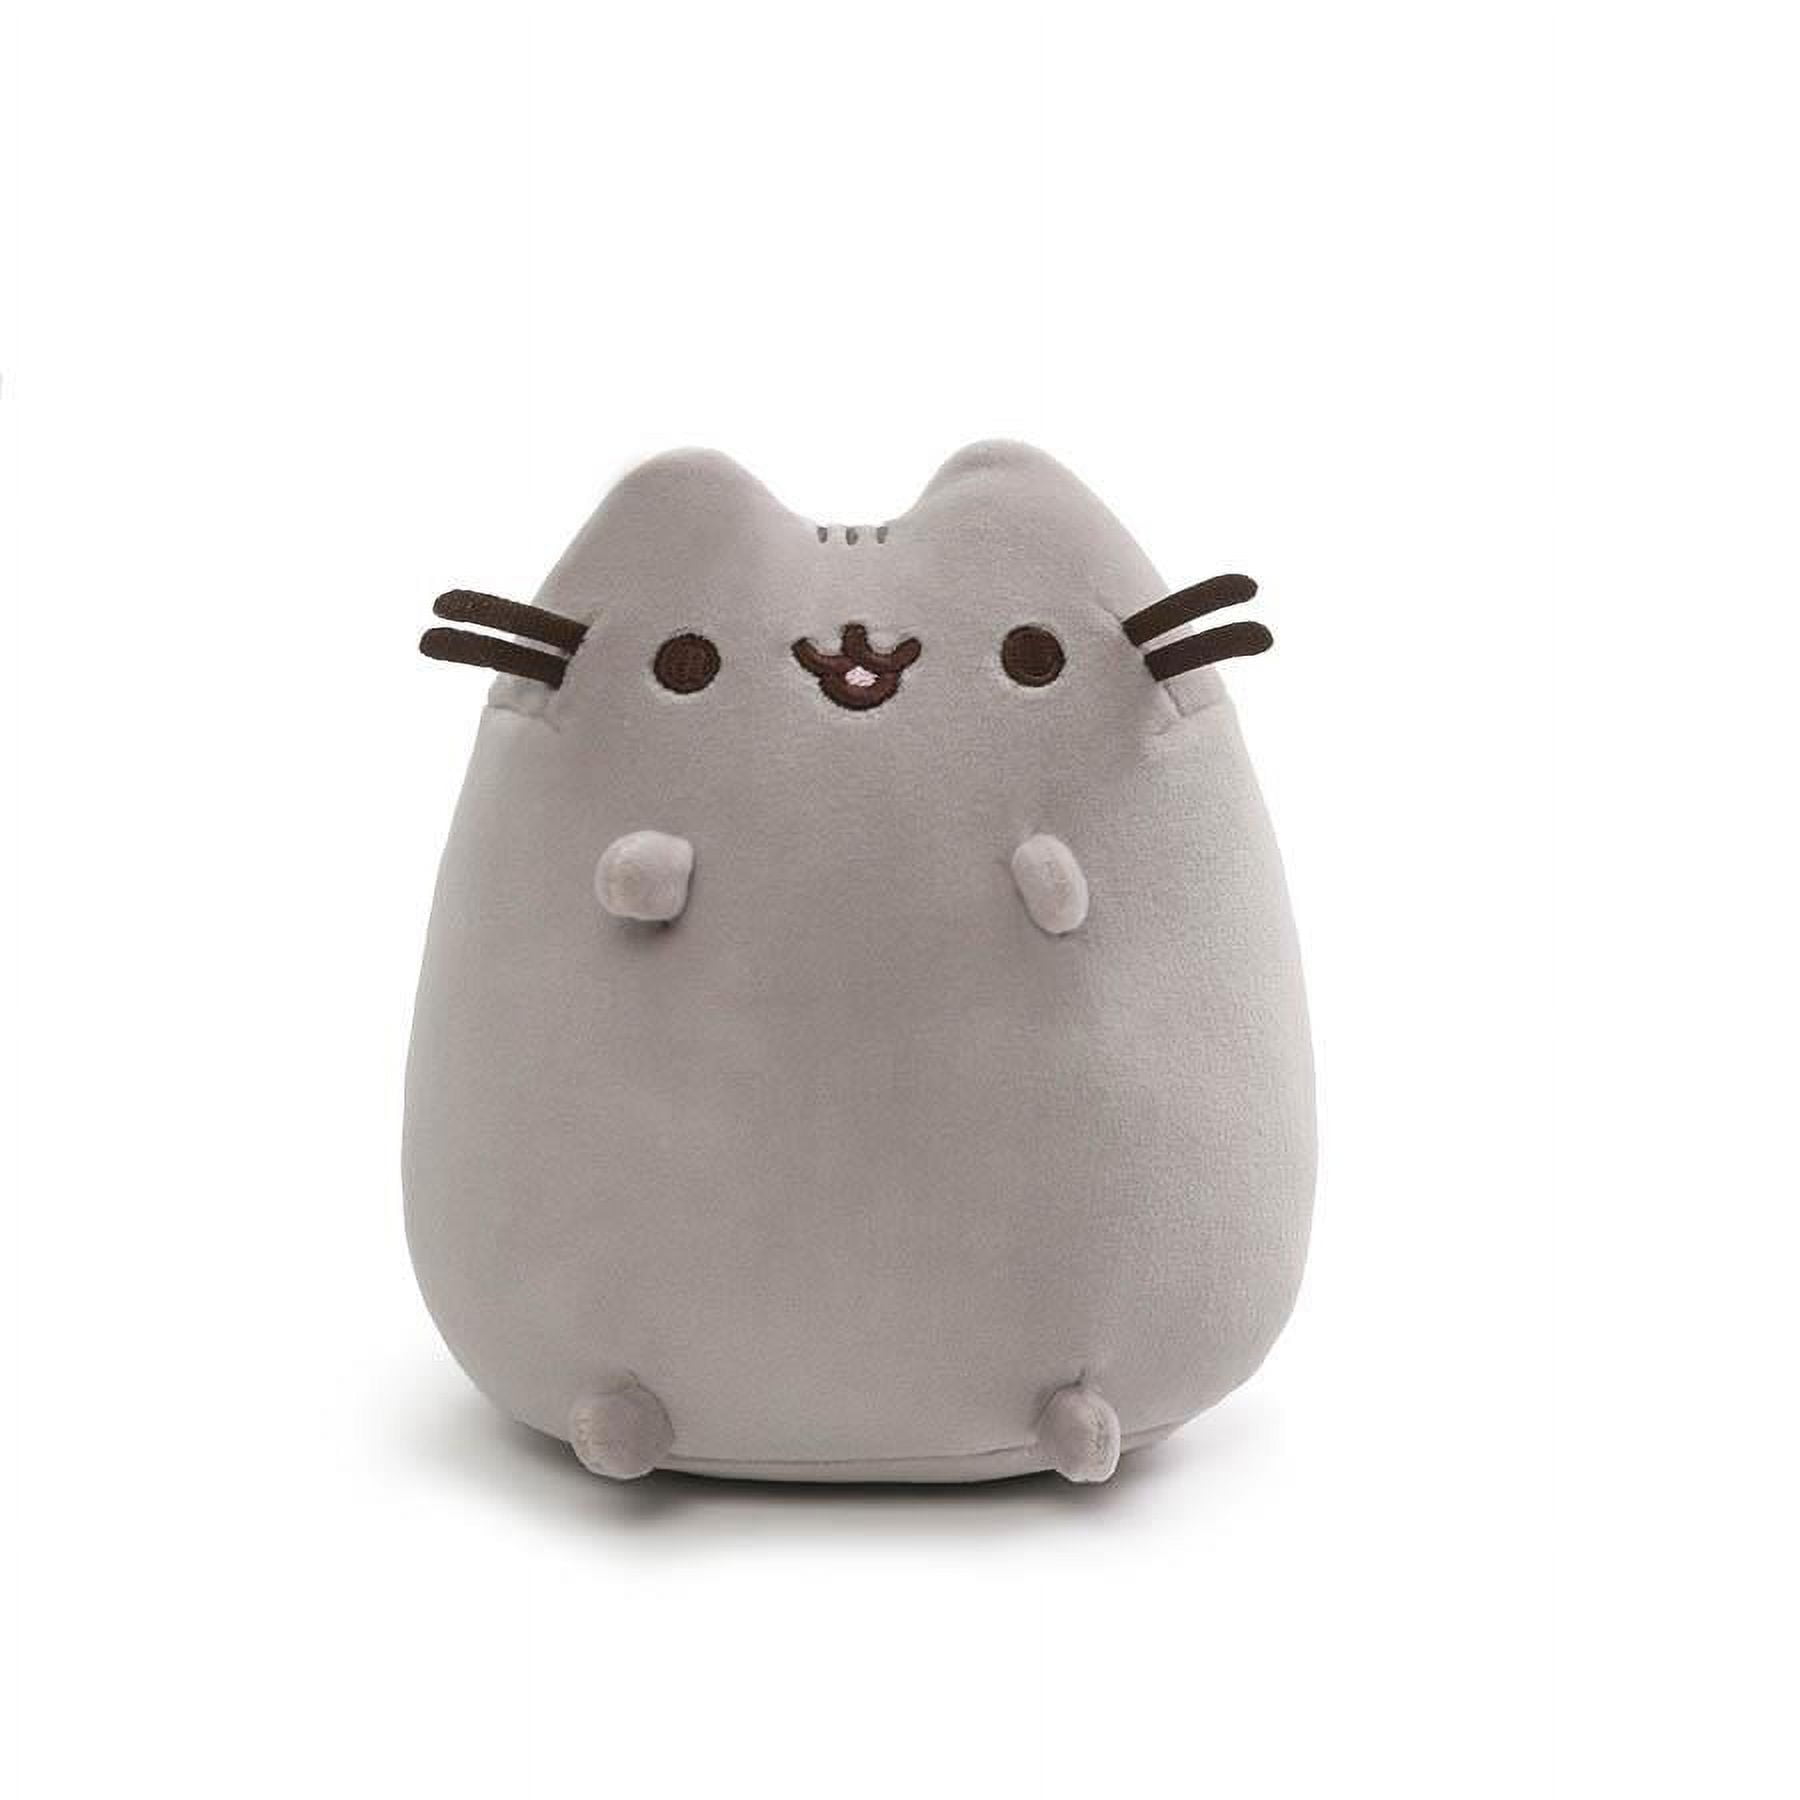 GUND Pusheen The Cat Pancake Squisheen Plush, Squishy Toy Stuffed Animal  for Ages 8 and Up, Brown, 6”